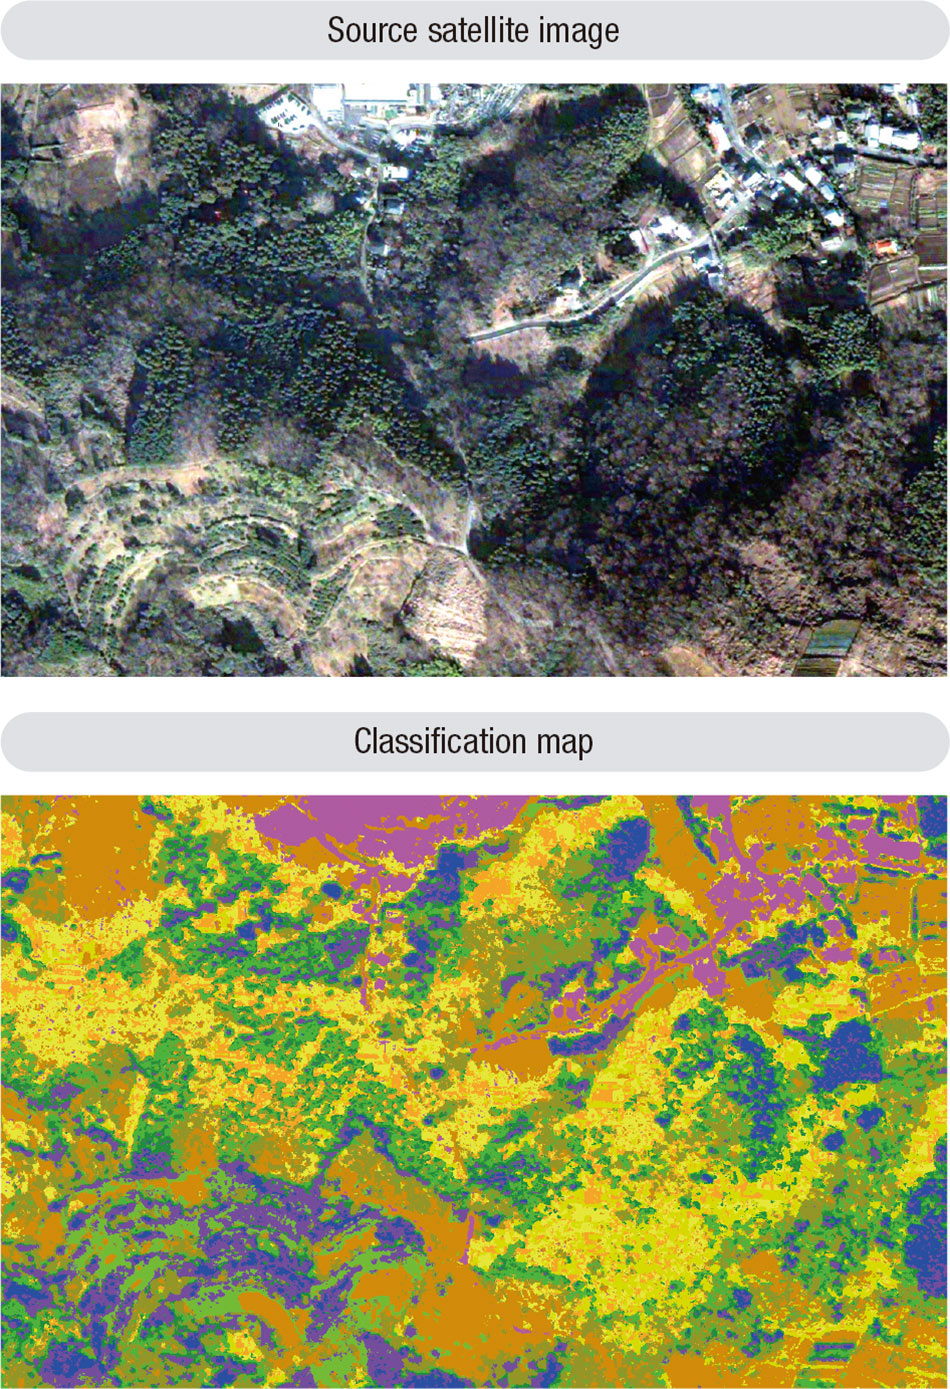 Fig. 5|Mapping of Vegetation Distribution from Satellite Images